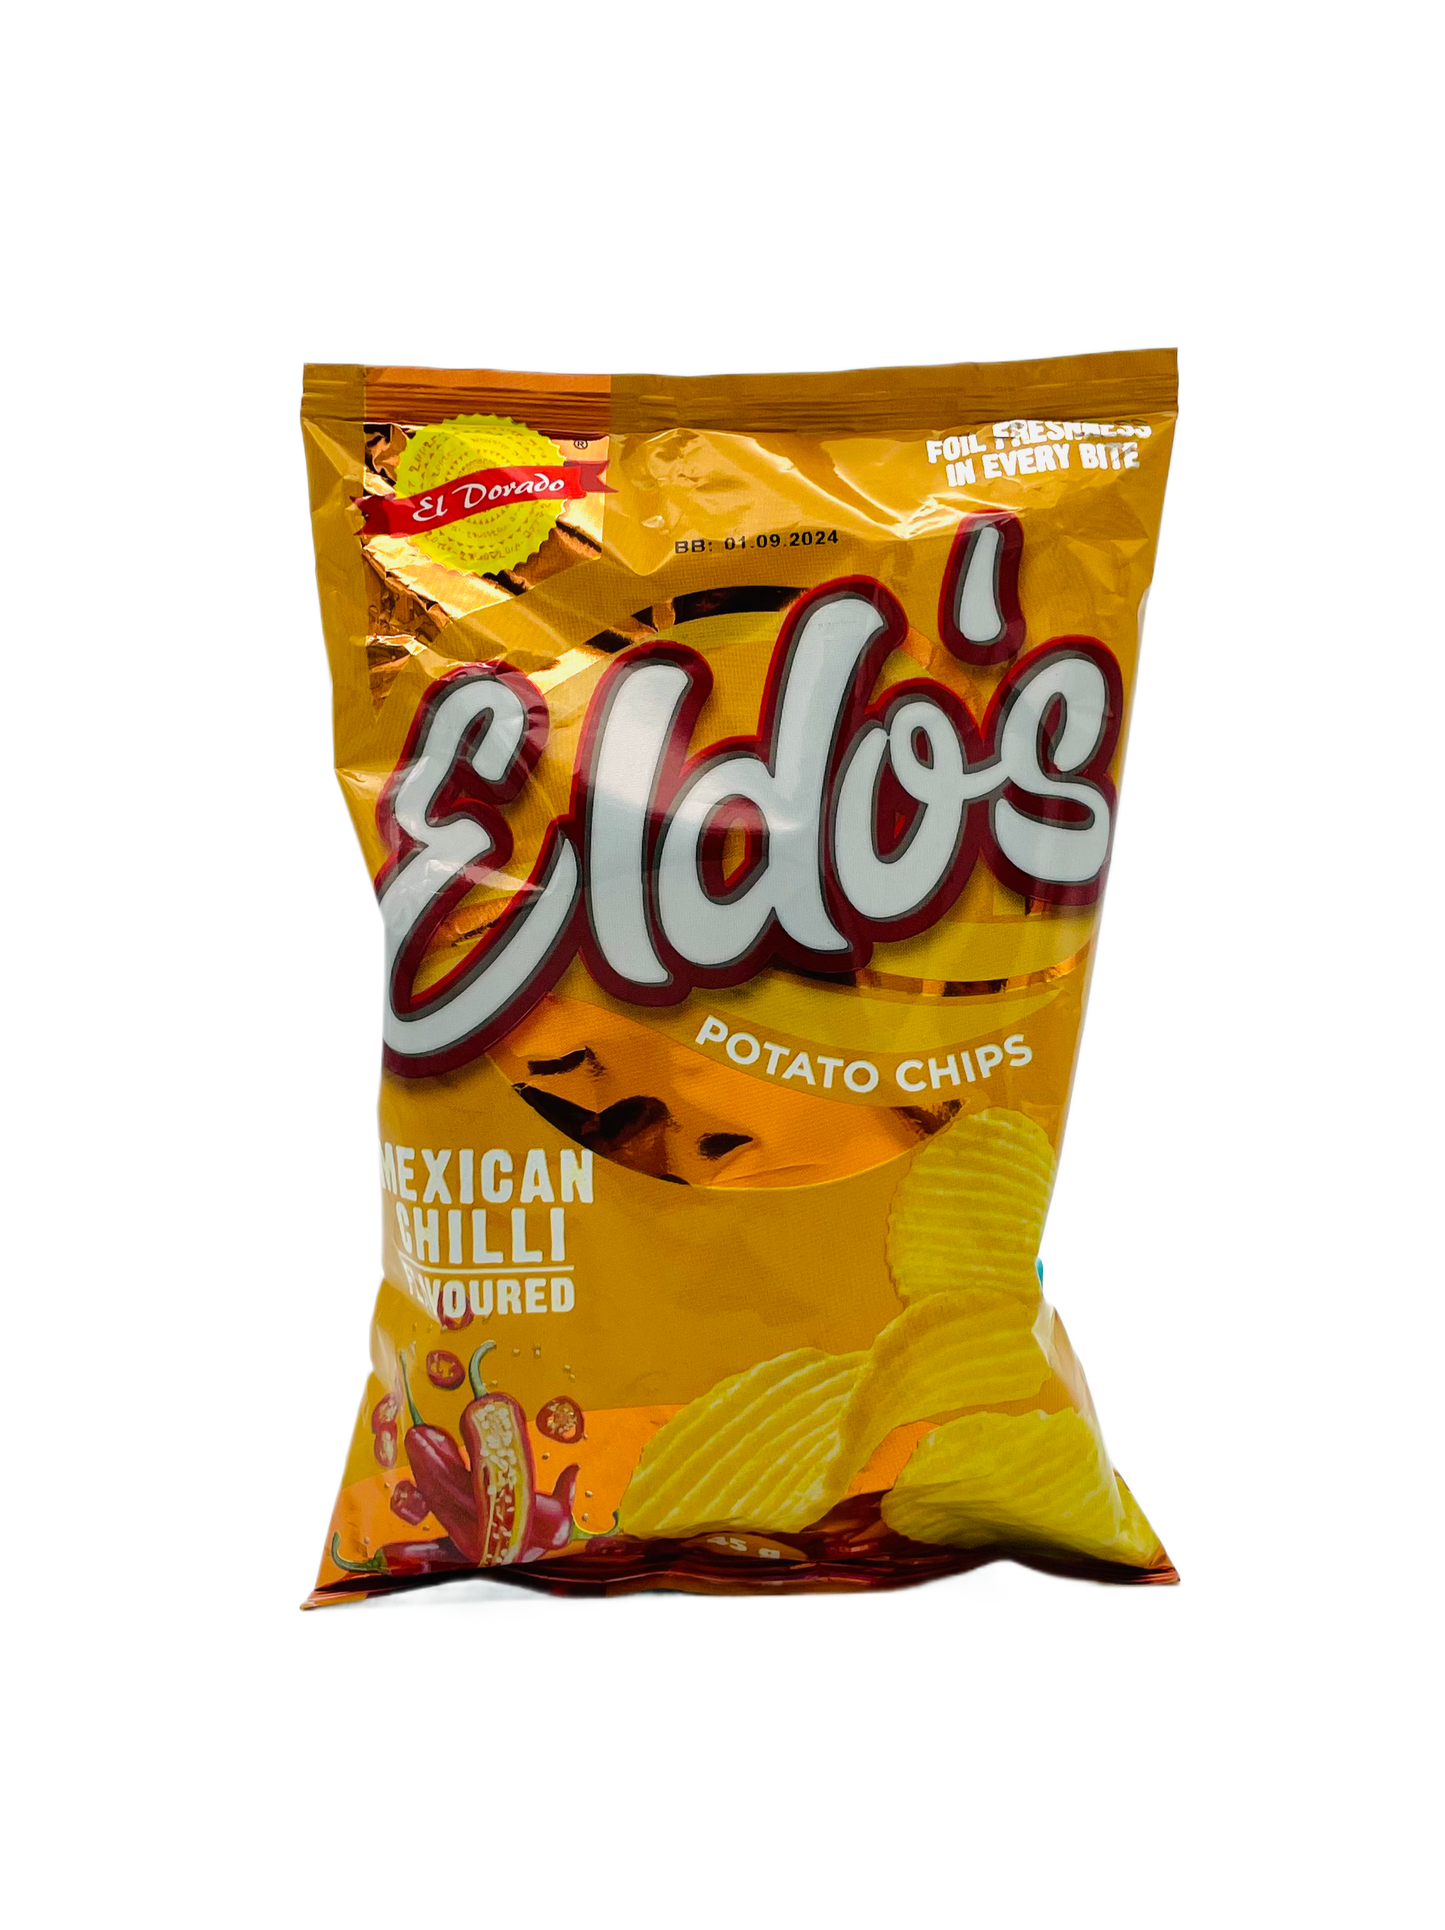 Eldos Mexican Chillie Chips 45g